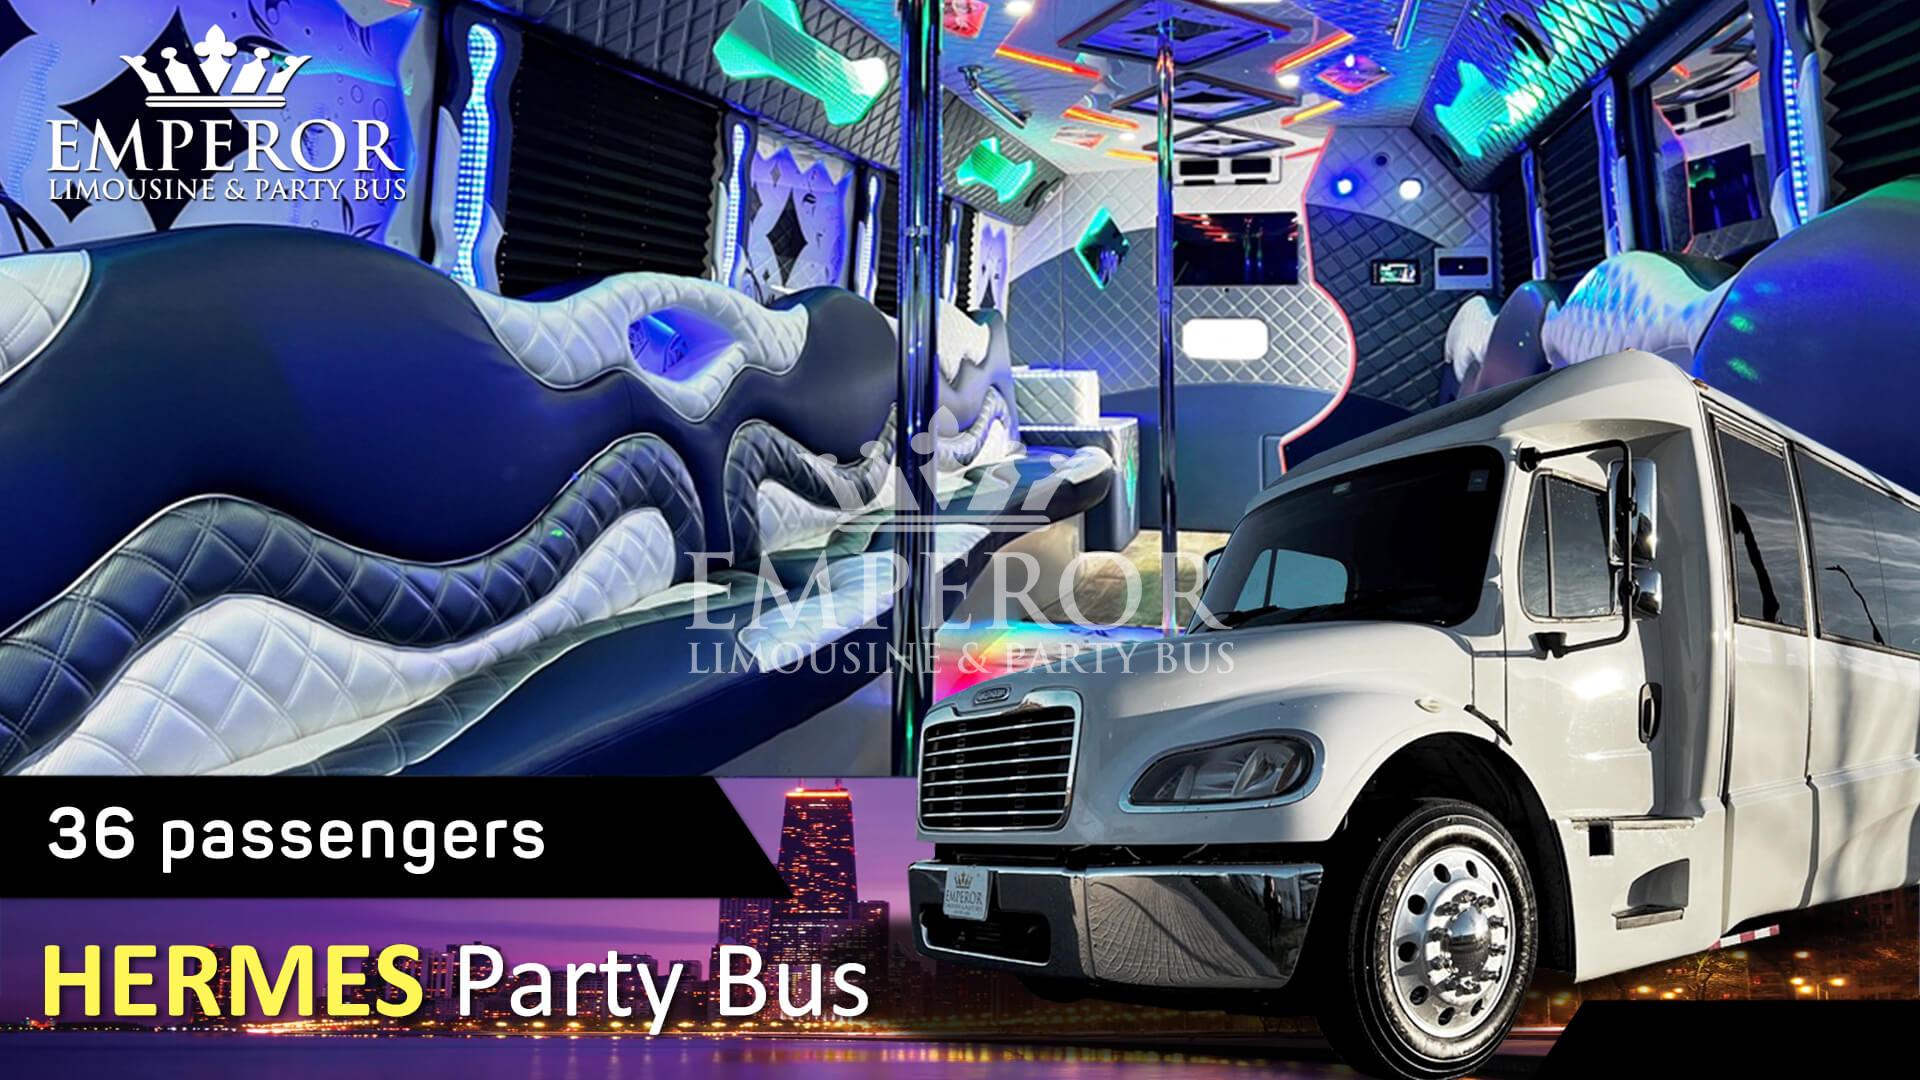 Party bus rental in Carol Stream, IL - Hermes Edition